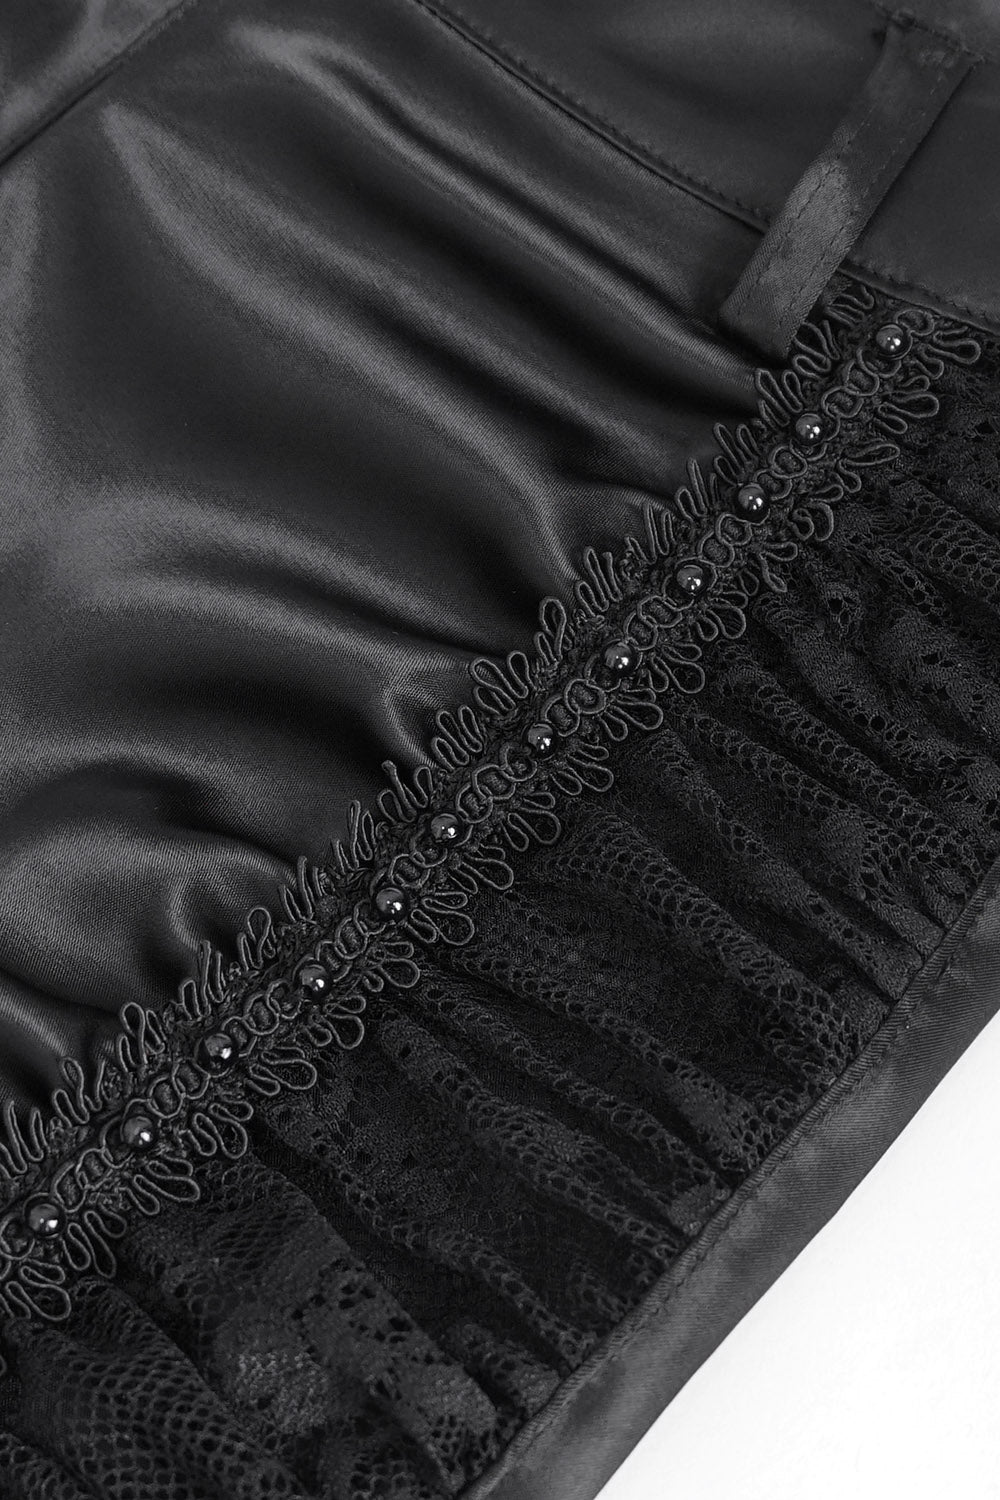 embroidered gothic pants